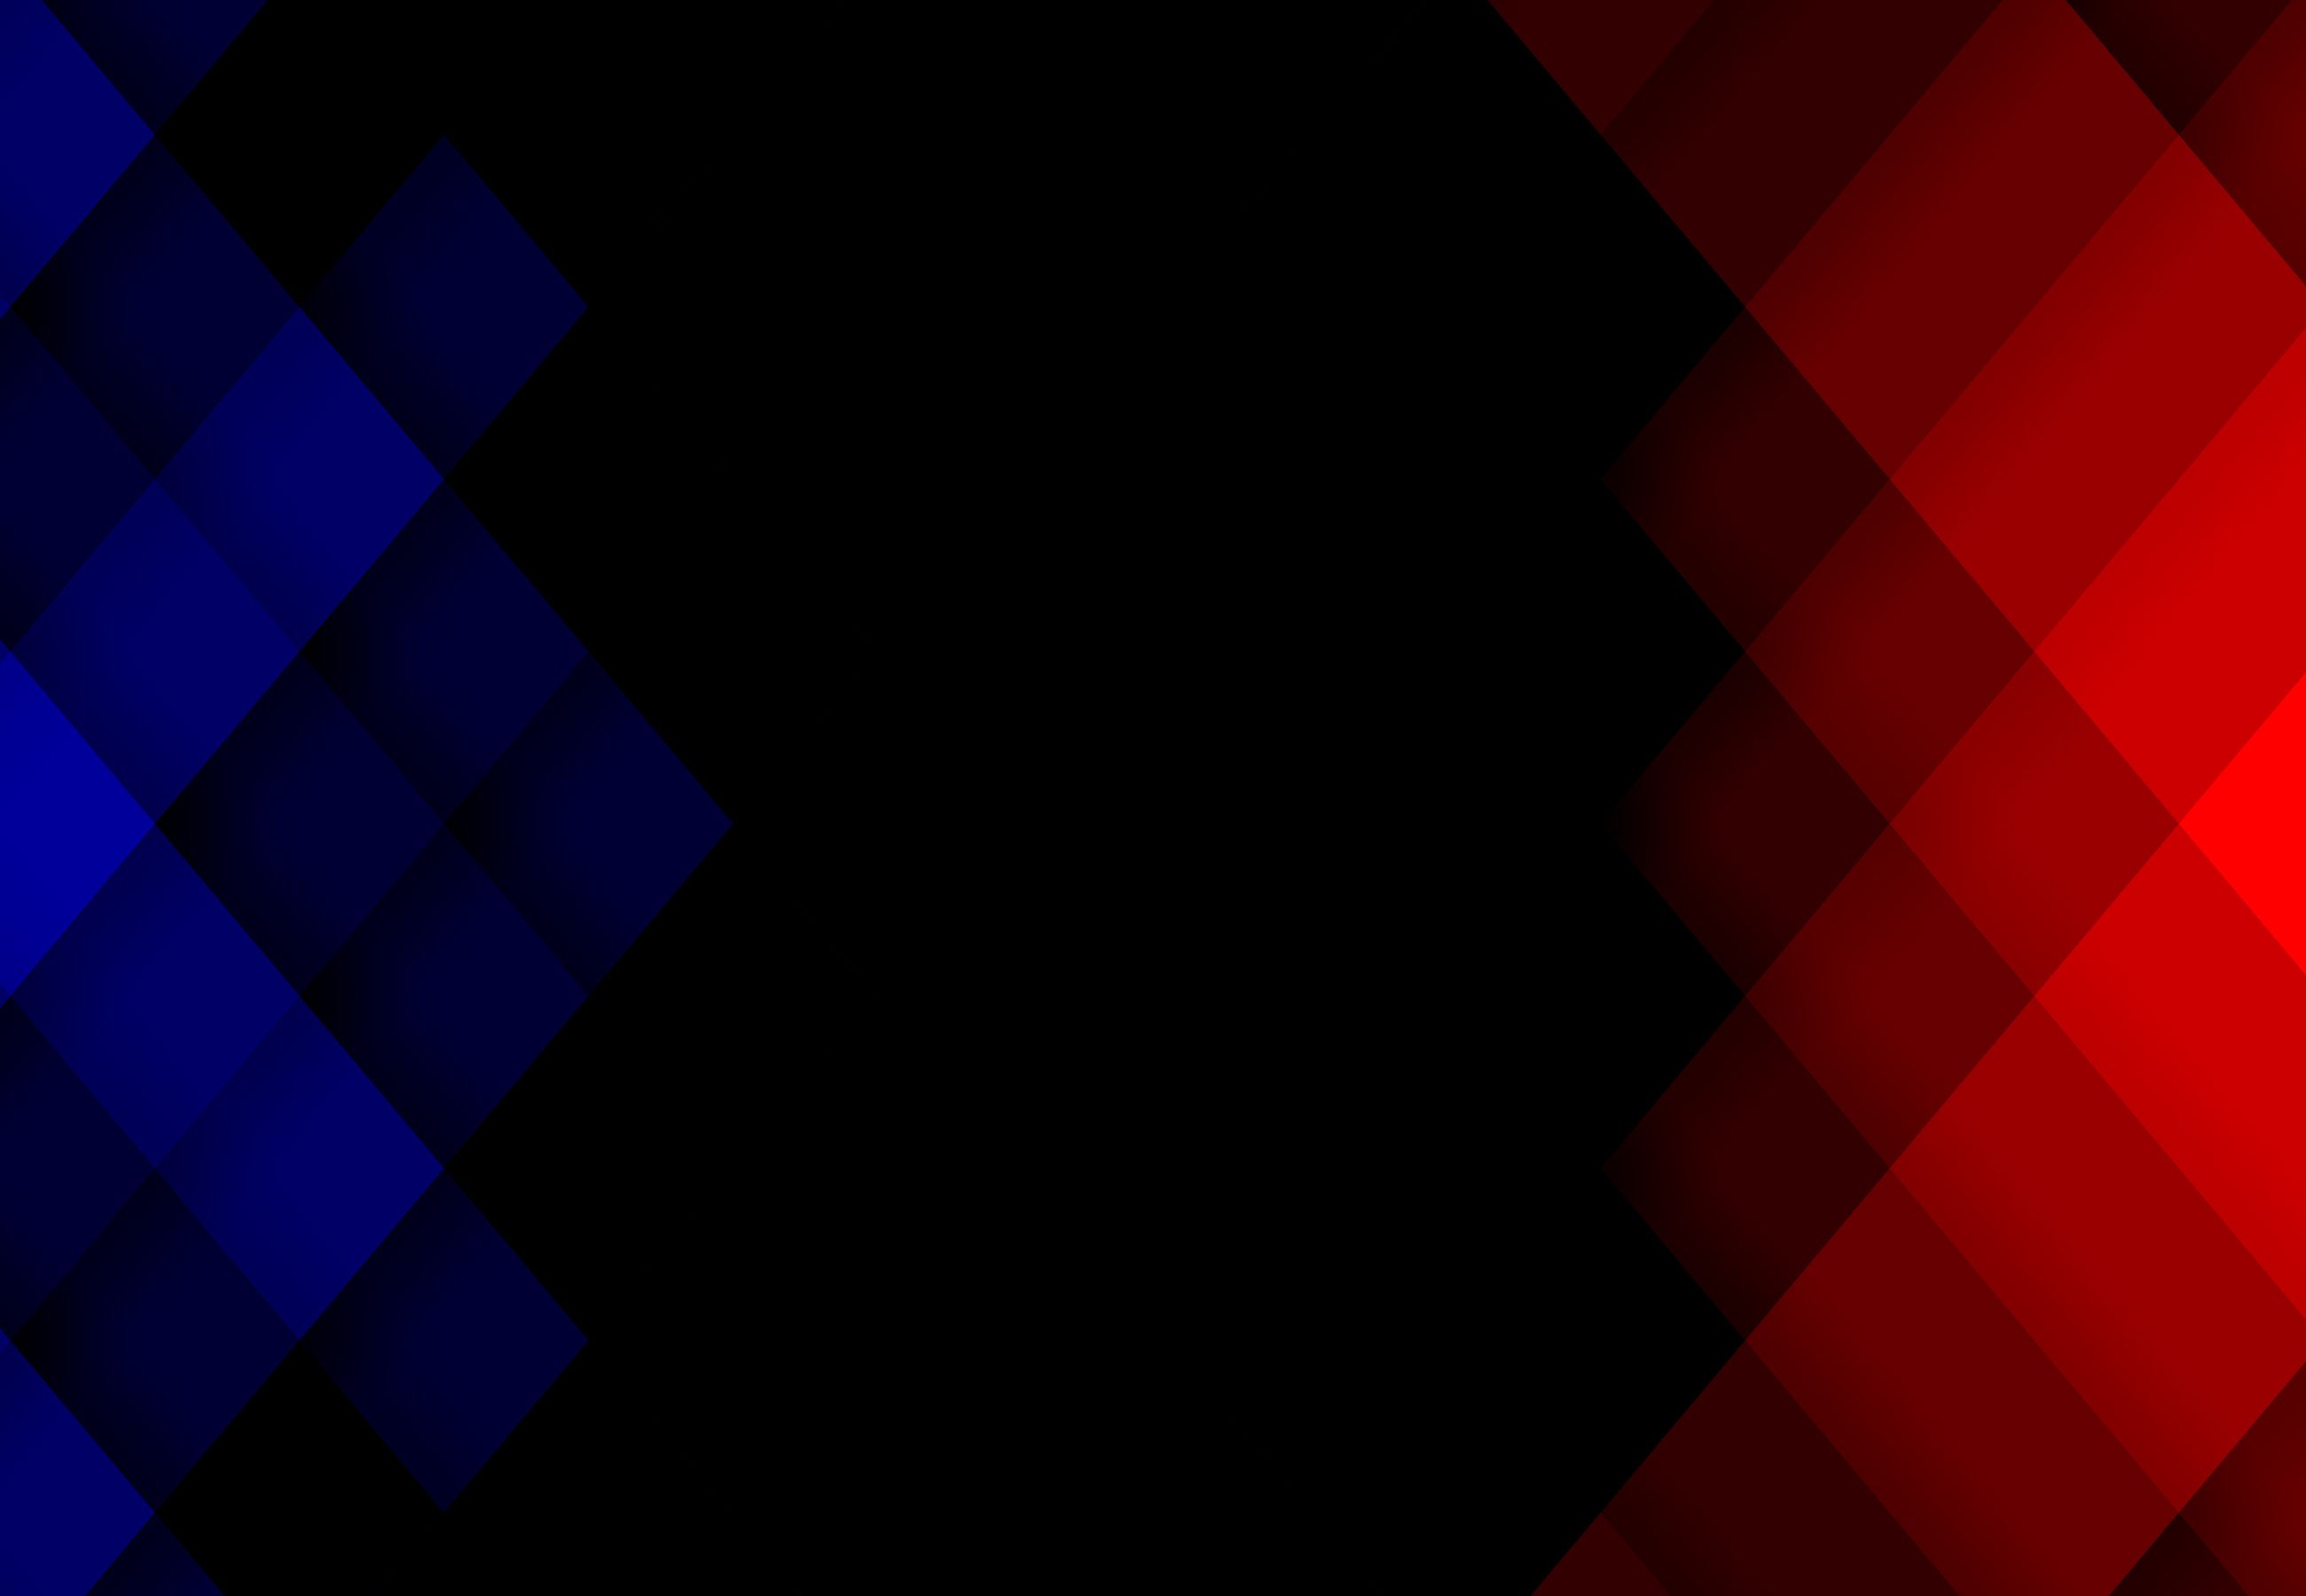 Free Download Blue And Red Backgrounds | PixelsTalk.Net